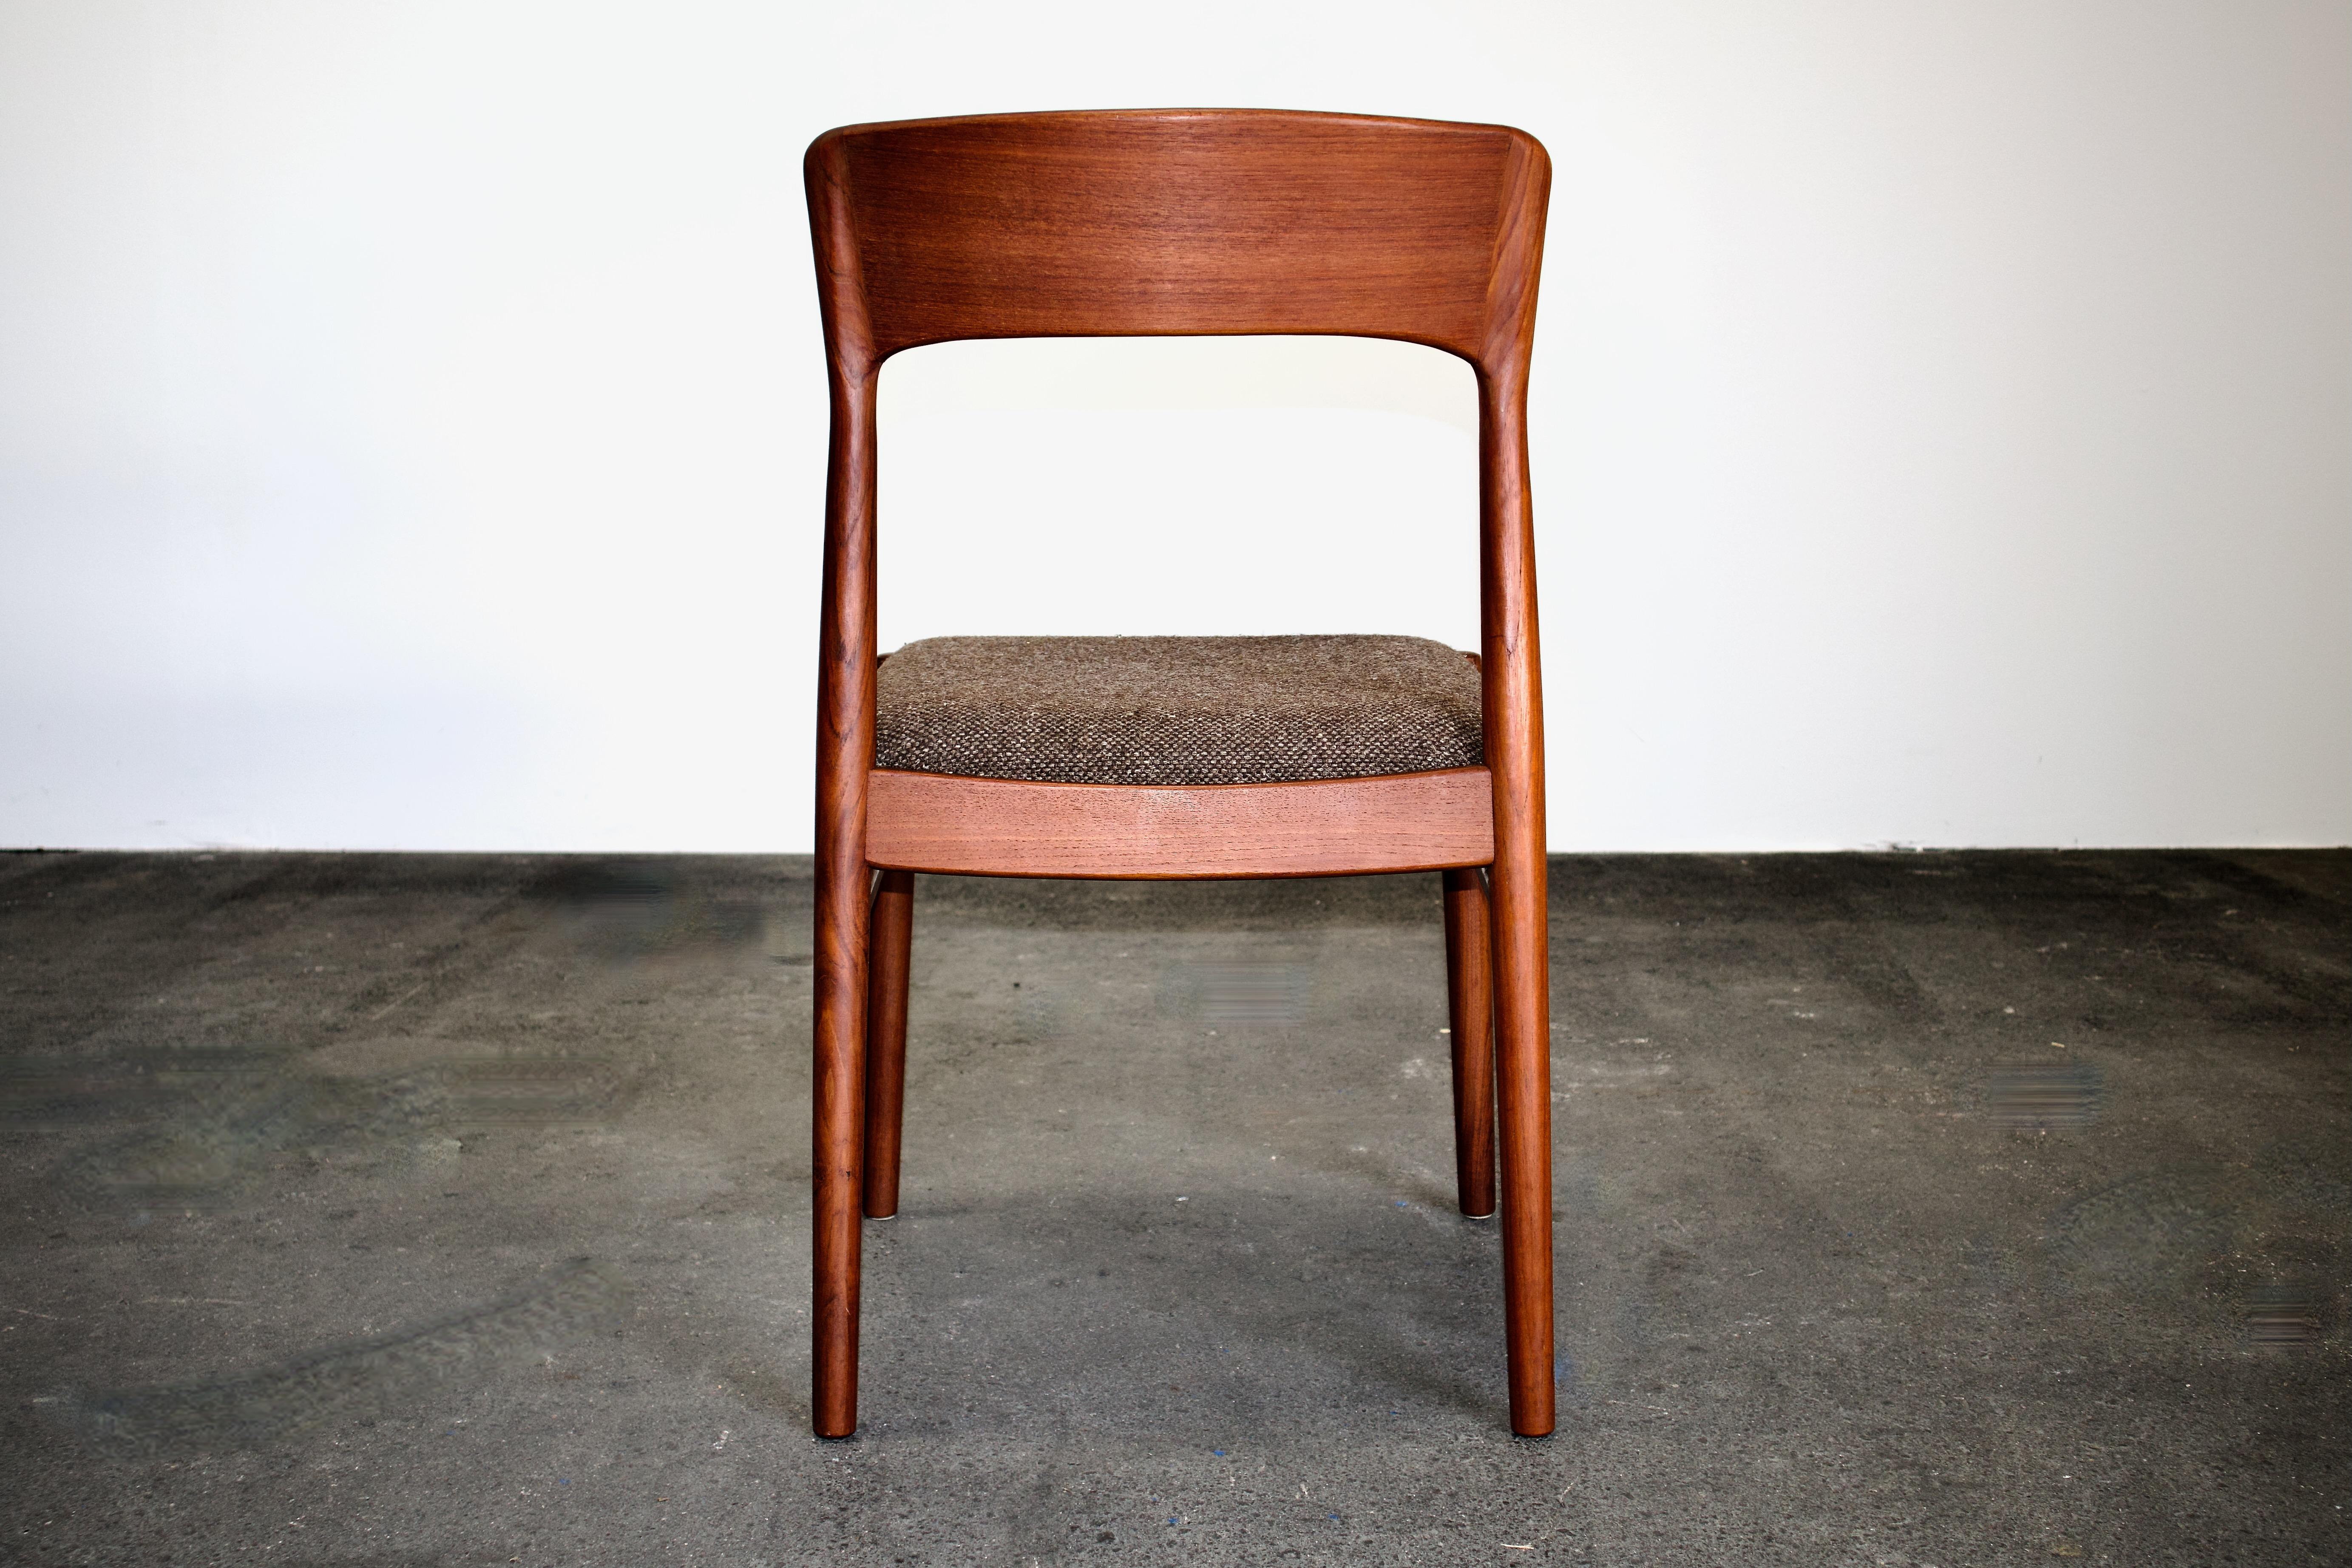 Quirky 1960s Danish Teak Chairs By Kai Kristiansen for K.S. Mobler For Sale 1